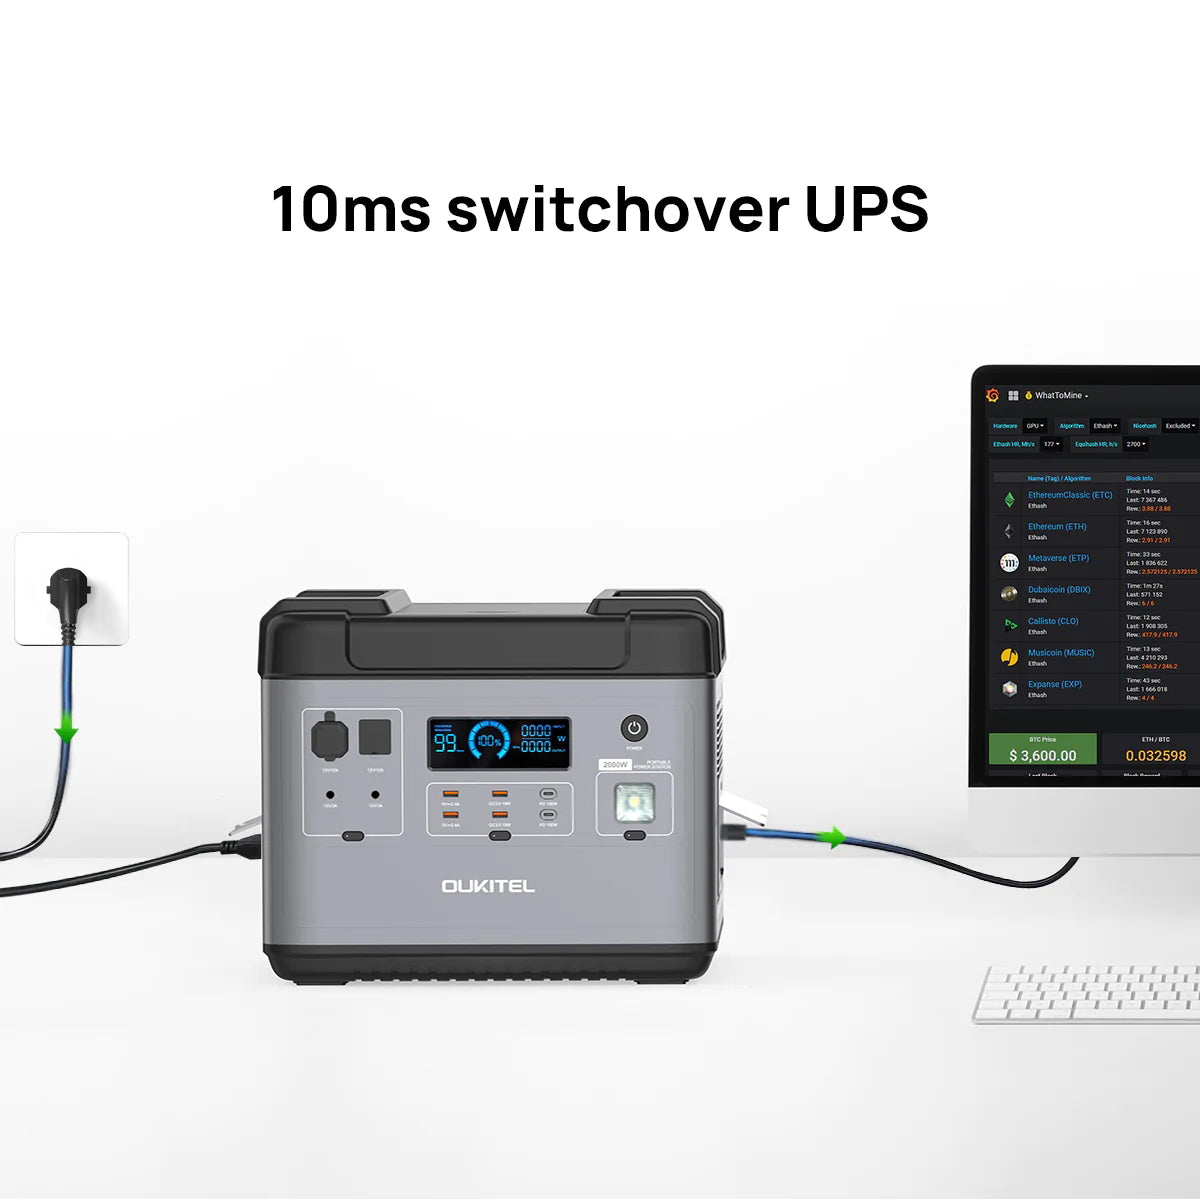 Switch To UPS In 10ms